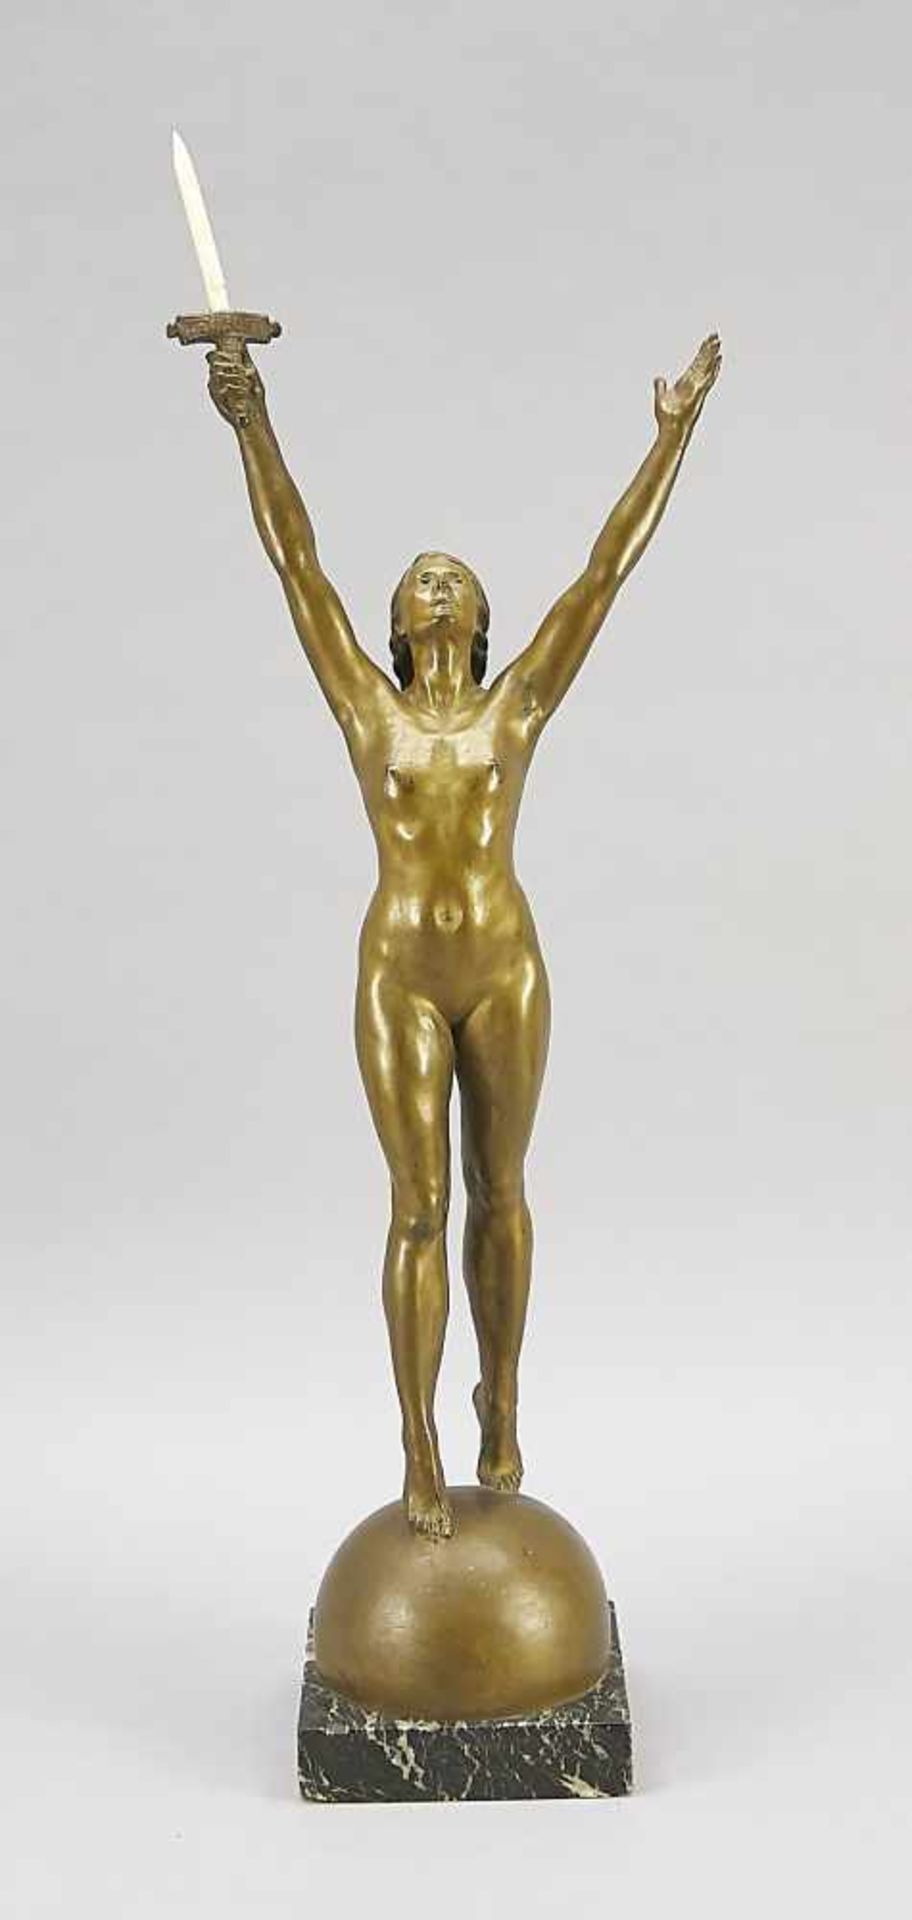 Emile Oscar Guillaume (1867-1942), 'La délivrance', female. Act with sword in victory pose<